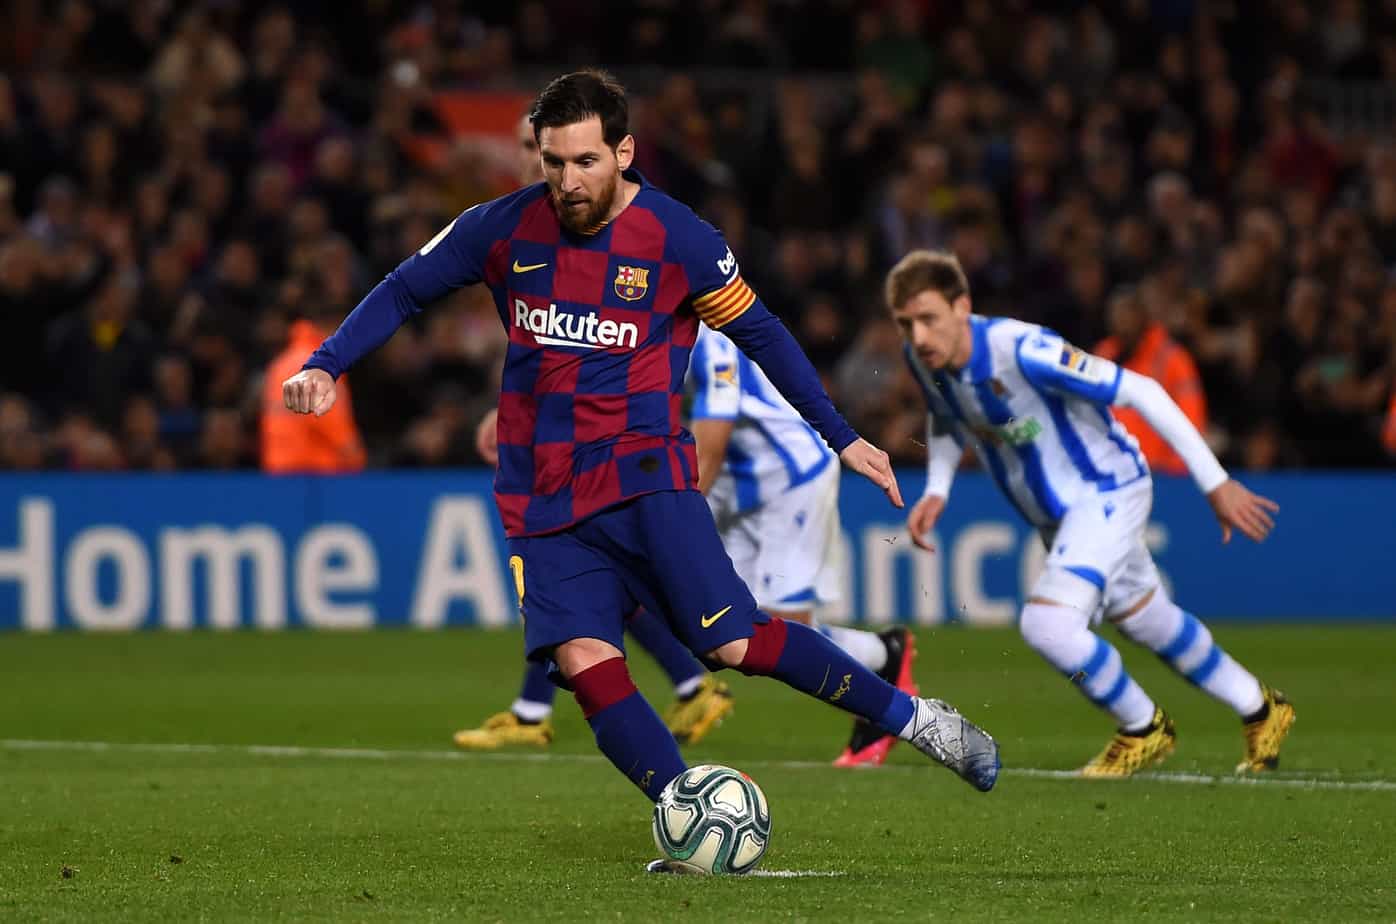 Real Sociedad vs. FC Barcelona – Betting Odds and Free Pick